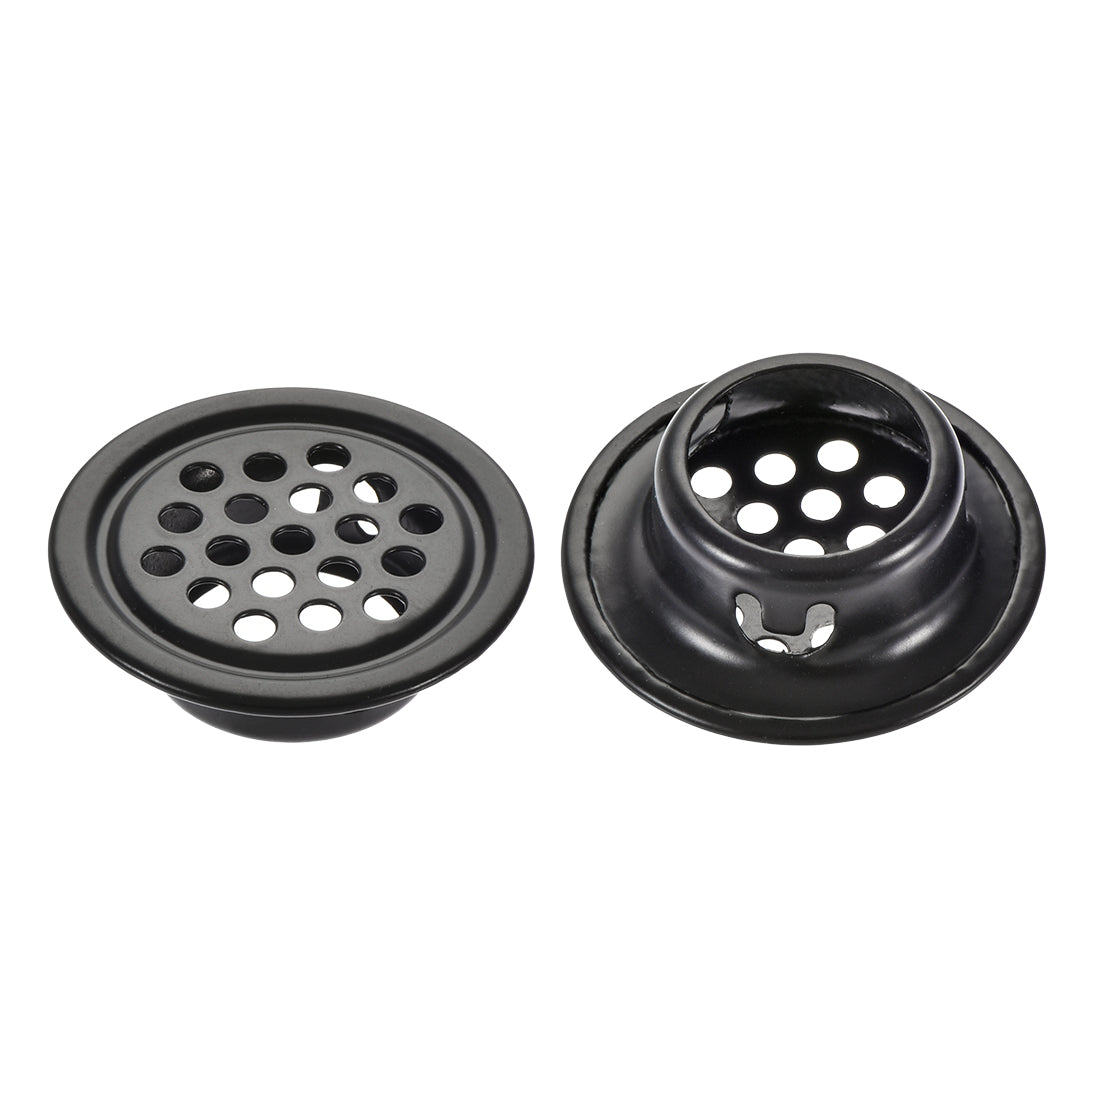 uxcell Uxcell Round Air Vents, Fit 0.75" Dia. Hole, Flat Circle Mesh Airflow Louver for Kitchen Cabinet Shoebox Wardrobe, Stainless Steel, Black Pack of 25